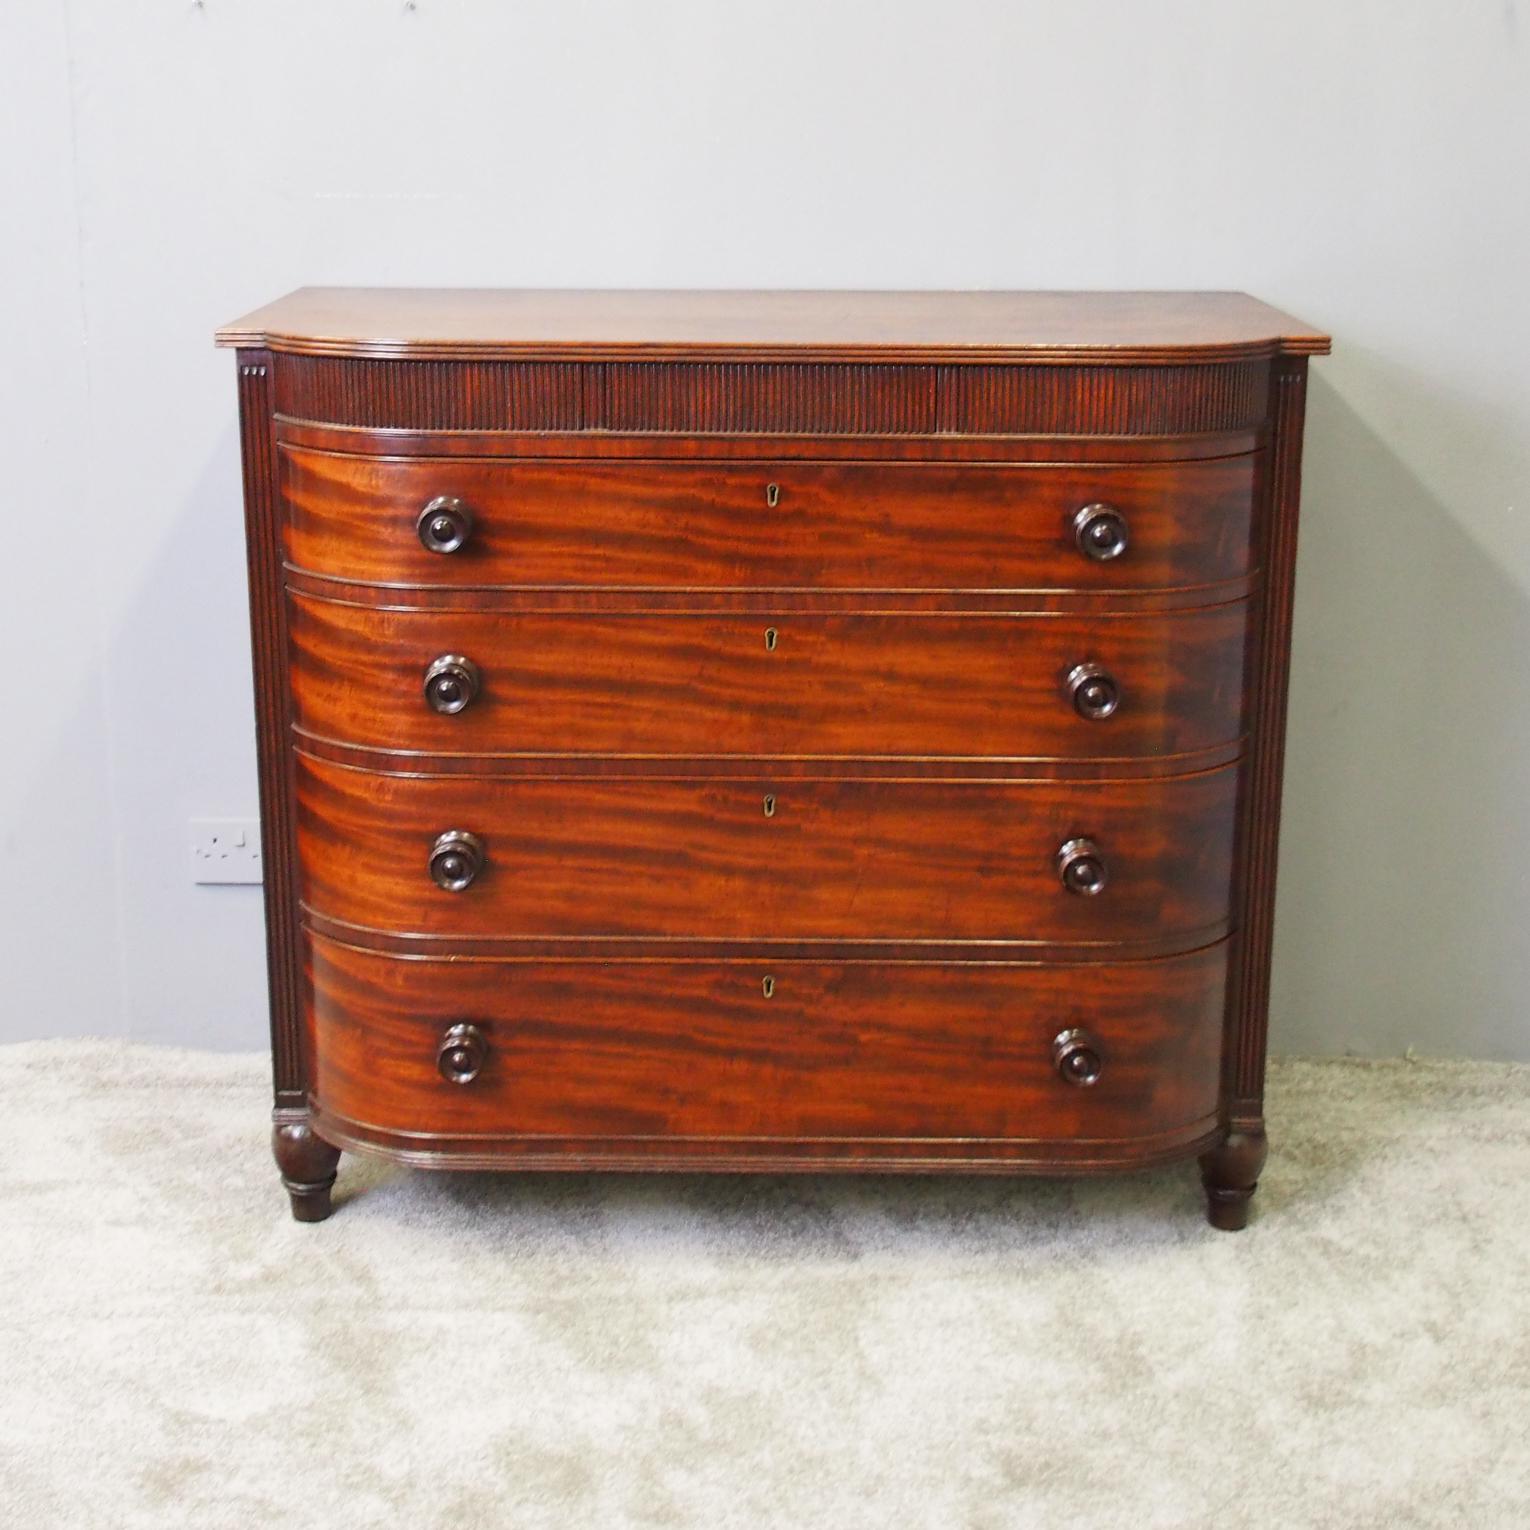 Rare Scottish mahogany chest of drawers by Gordon and Watson, cabinet and chairs makers, Ayr, circa 1820. With solid mahogany top, reeded fore-edge and 3 drawers to the frieze, which have quilling pattern to their facing. Beneath are 4 full length